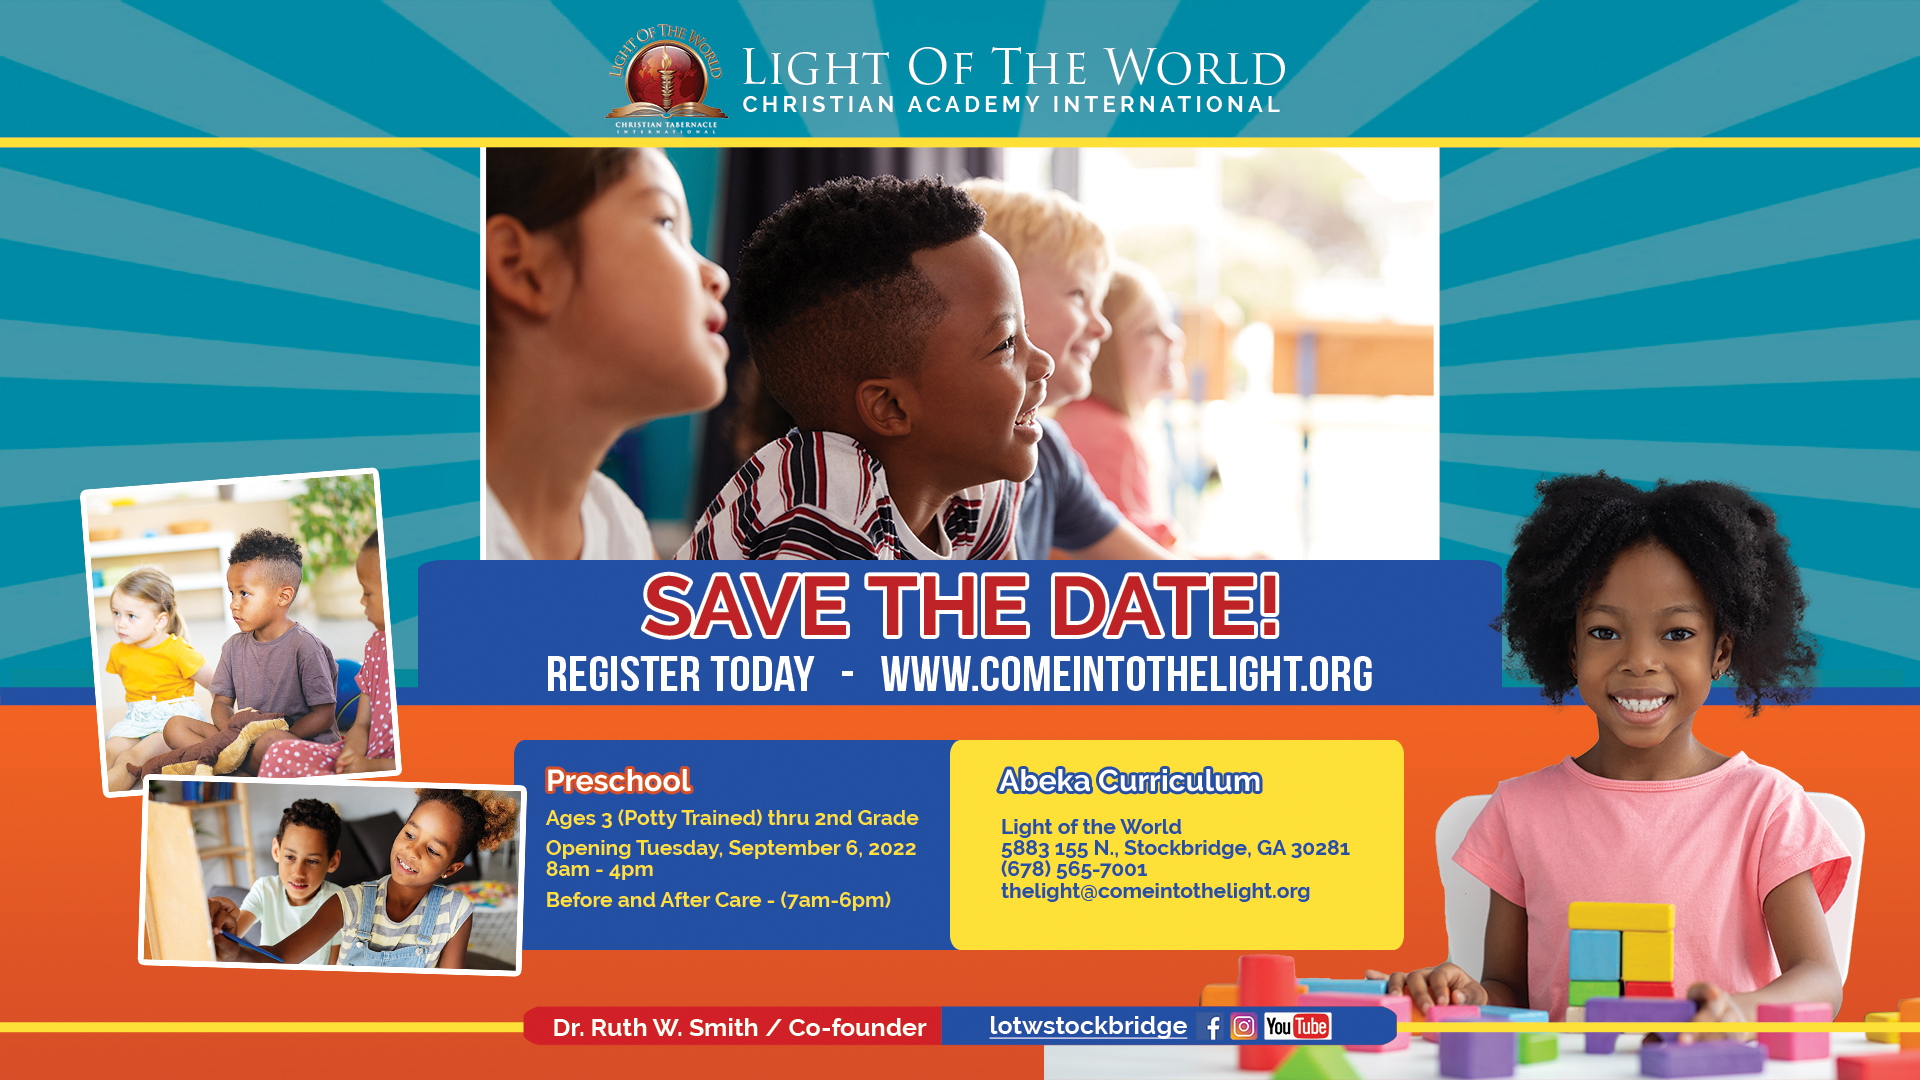 light of the world christian academy international flyer with pictures of children learning